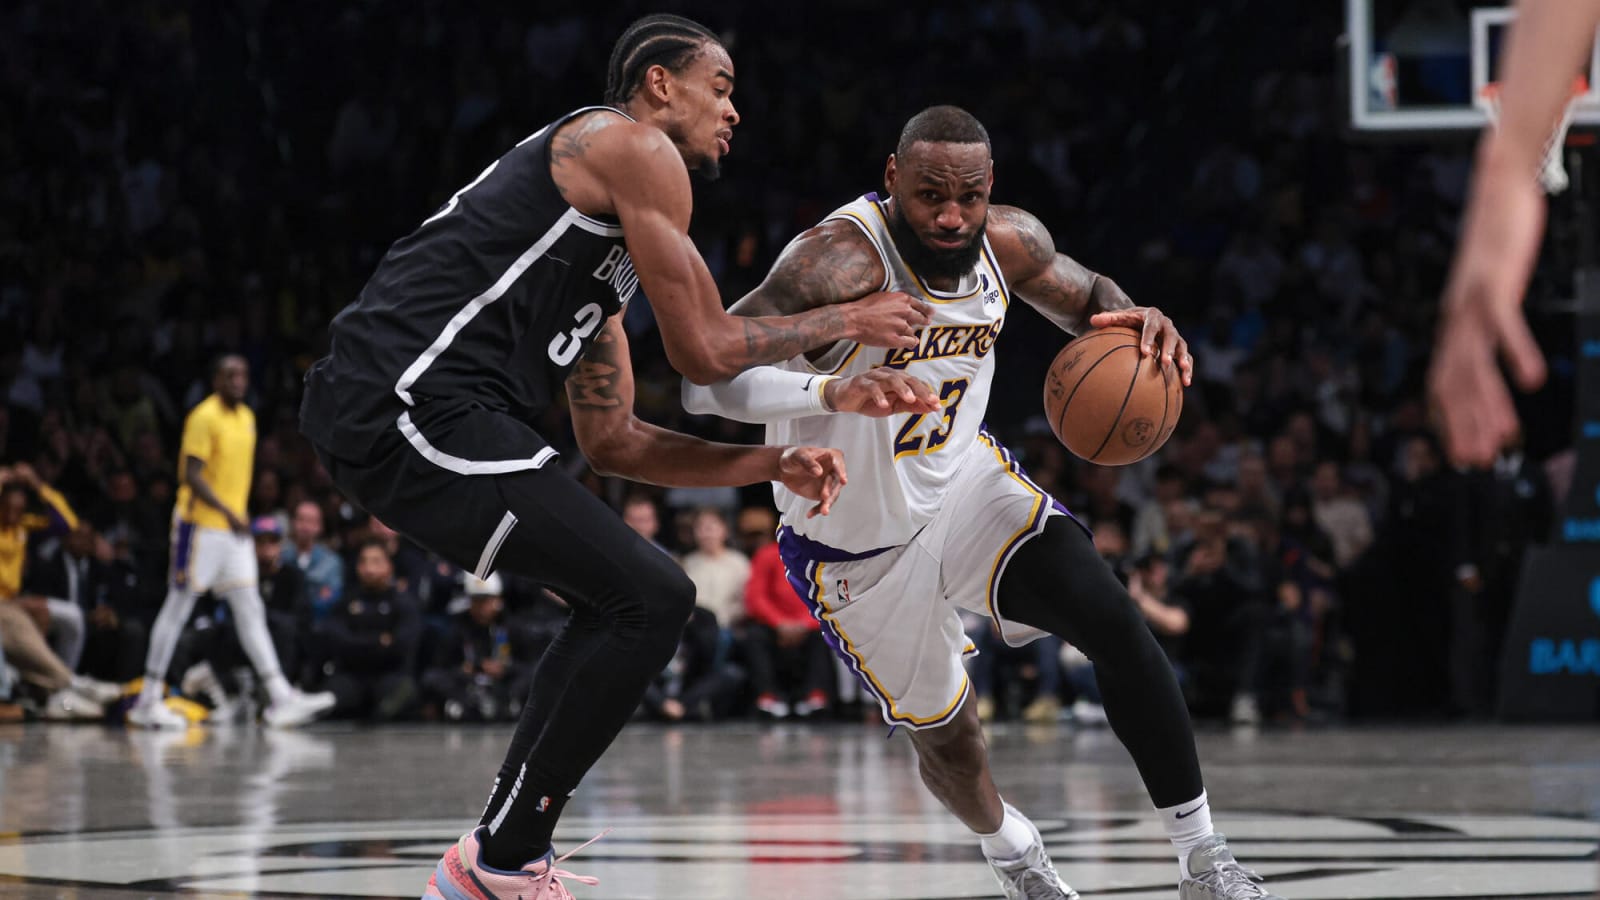 When Is LeBron James Retiring? Los Angeles Lakers Star Hints It’s Very Soon